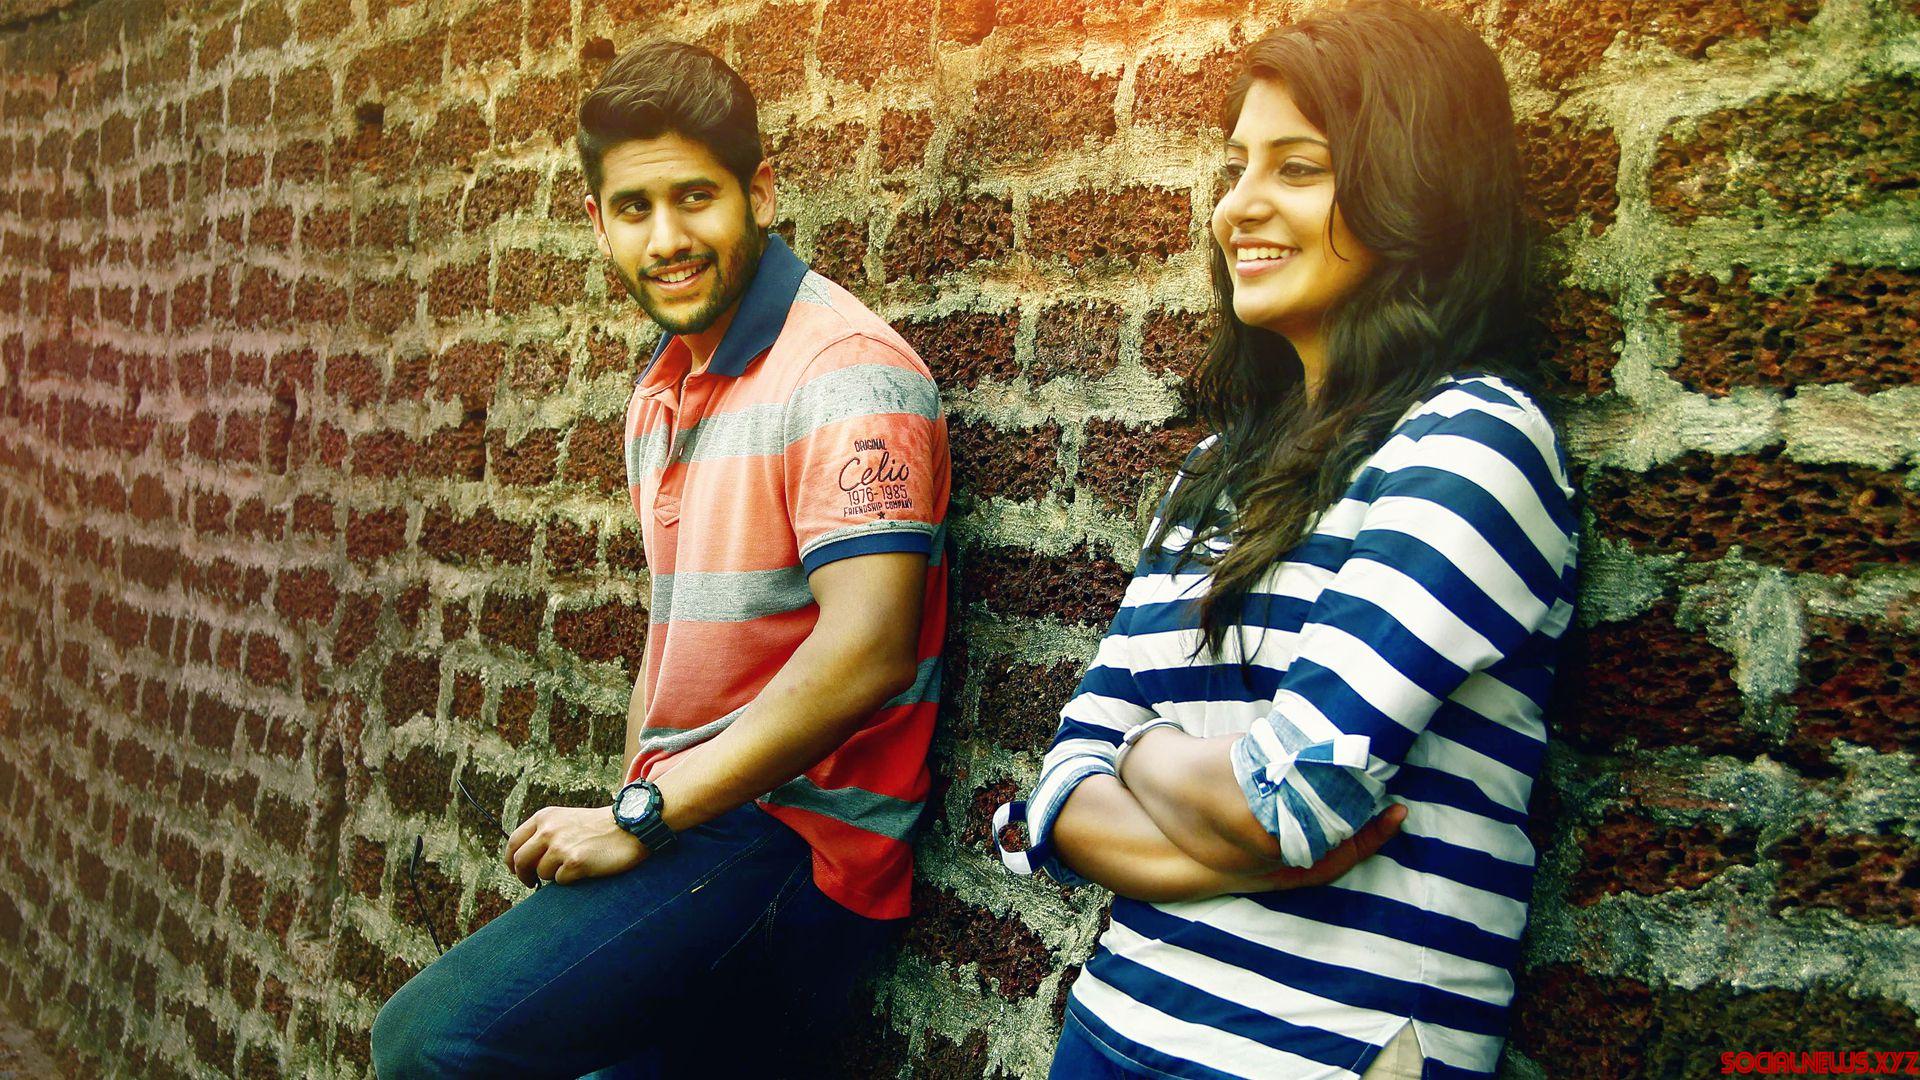 After 'Sahasam', audience will accept me in action roles: Naga Chaitanya -  Telugu News - IndiaGlitz.com